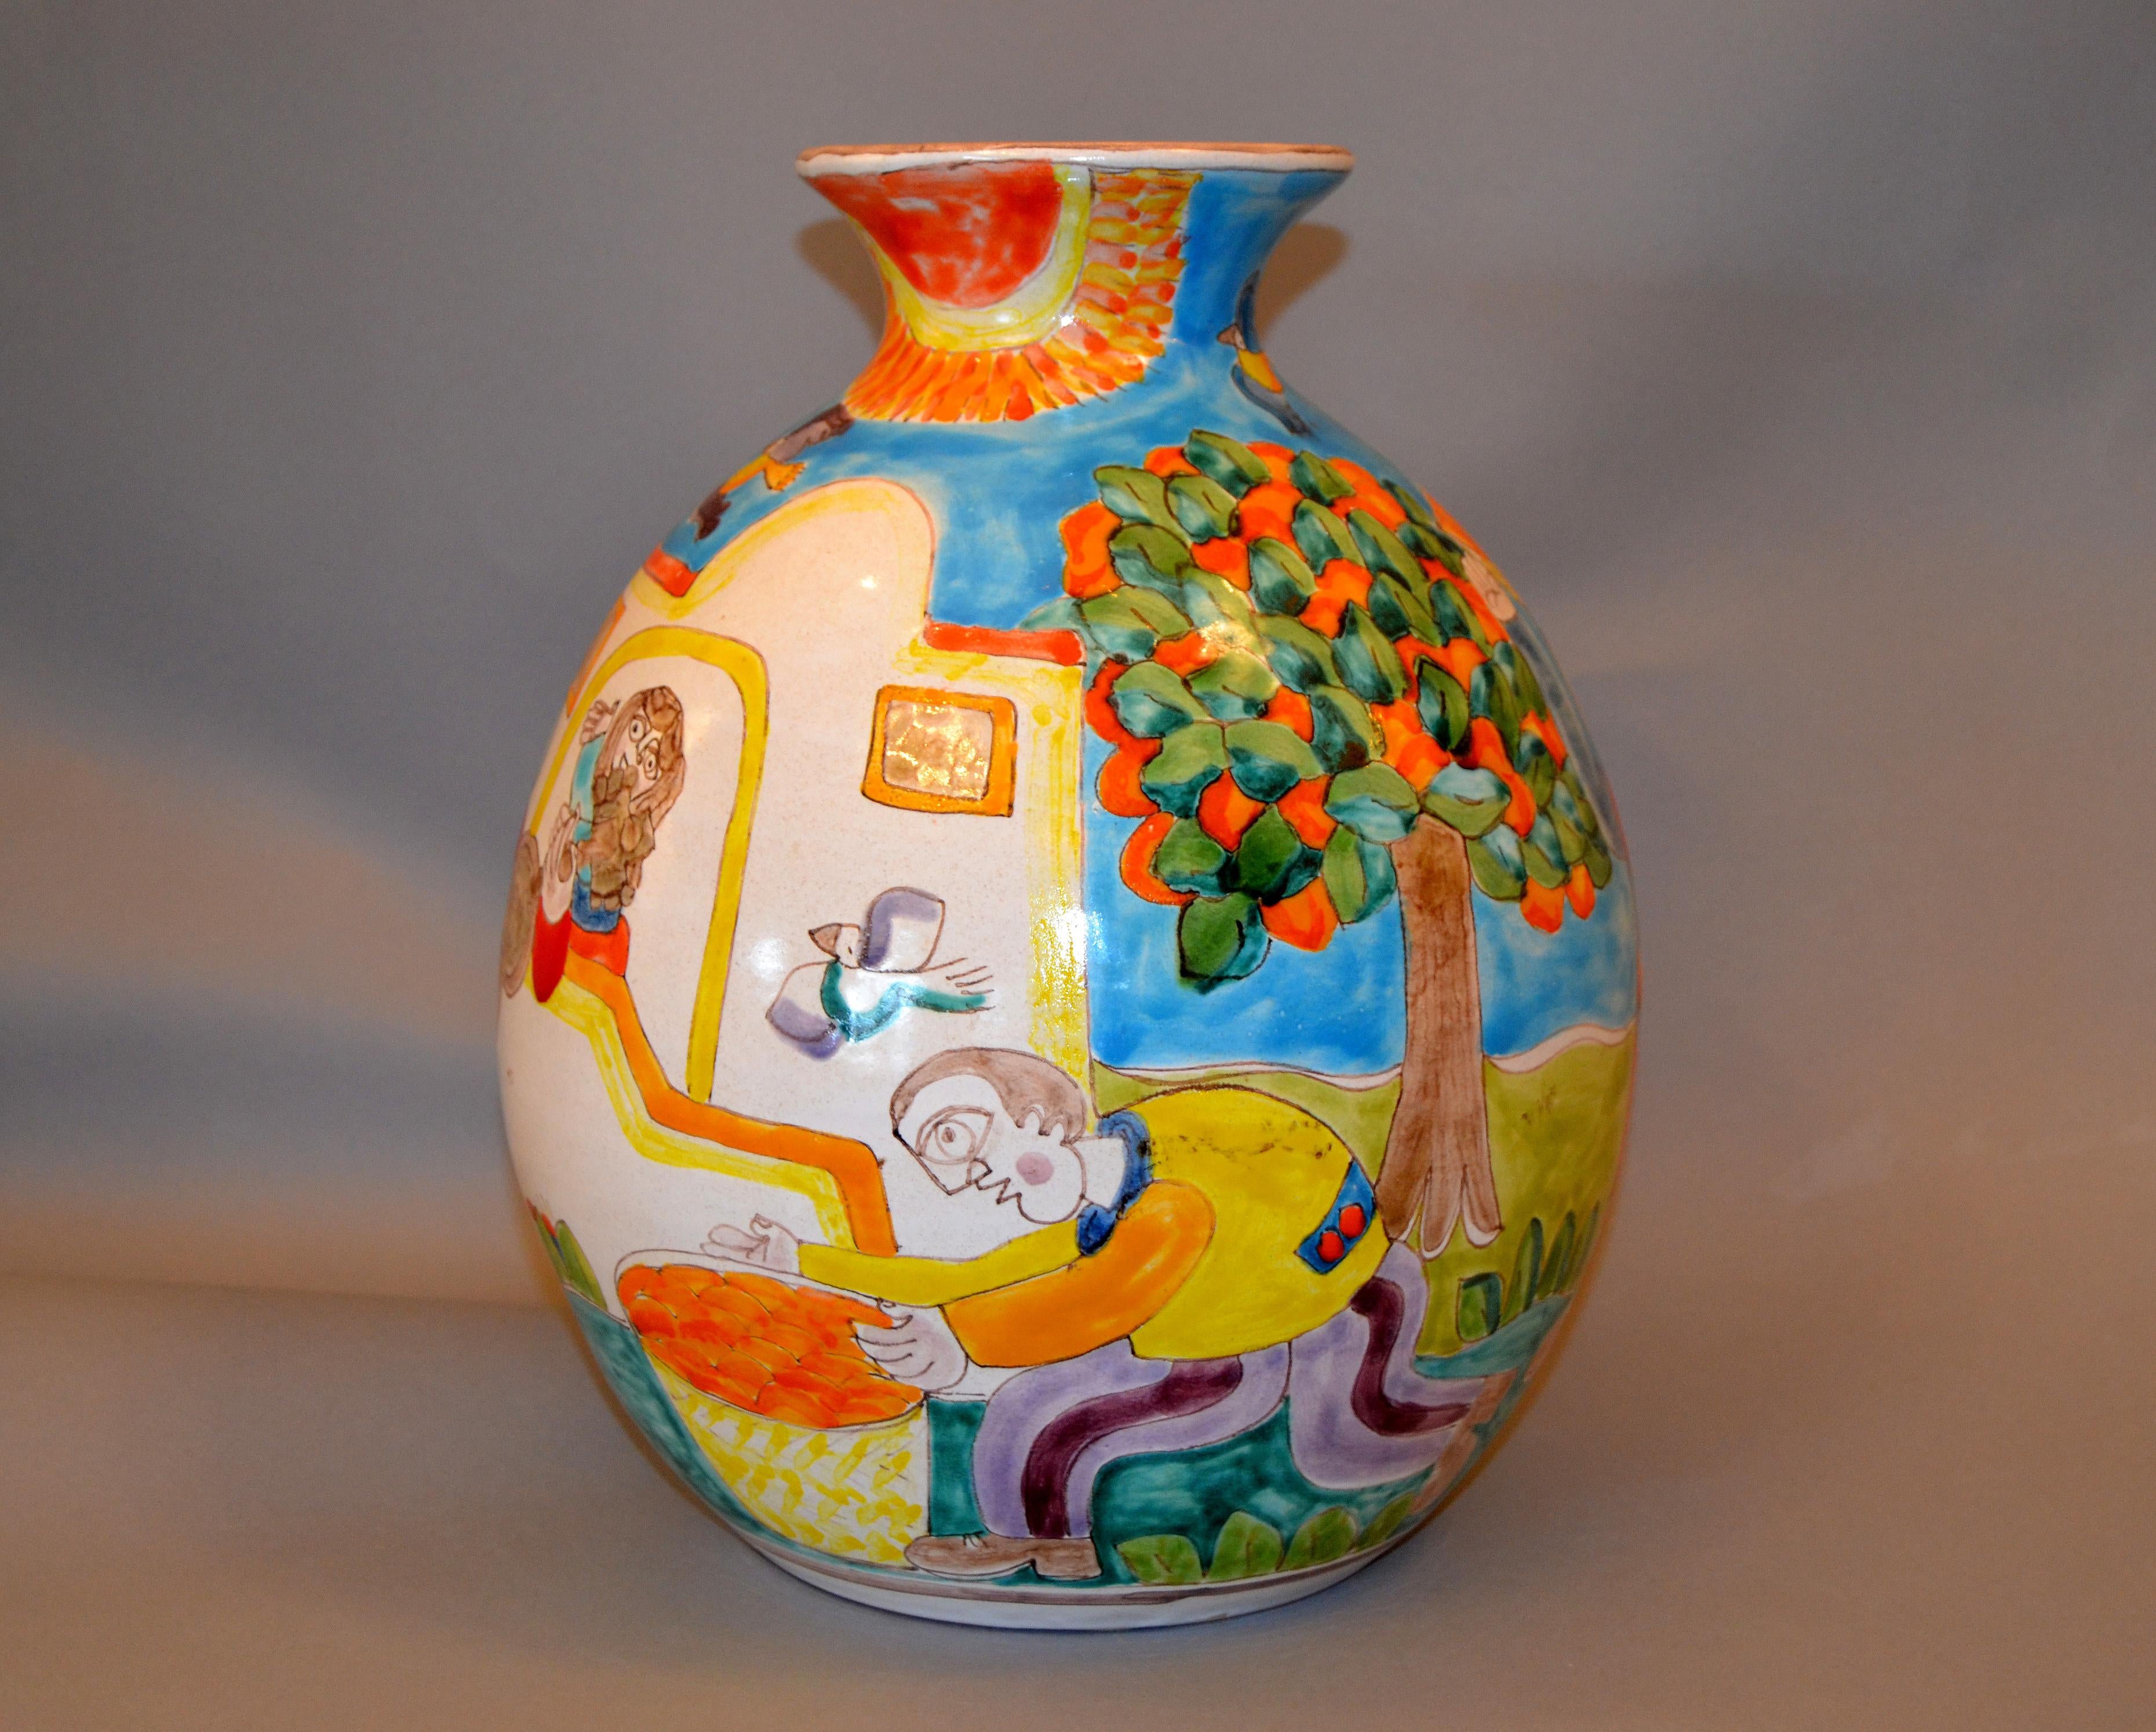 Original Italian Giovanni Desimone hand painted large art pottery flower vase, vessel.
The glazed vase painting depicts orange picking and harvest festival.
DeSimone Mark around the belly of the vase & marked and numbered on underside, 'DeSimone,